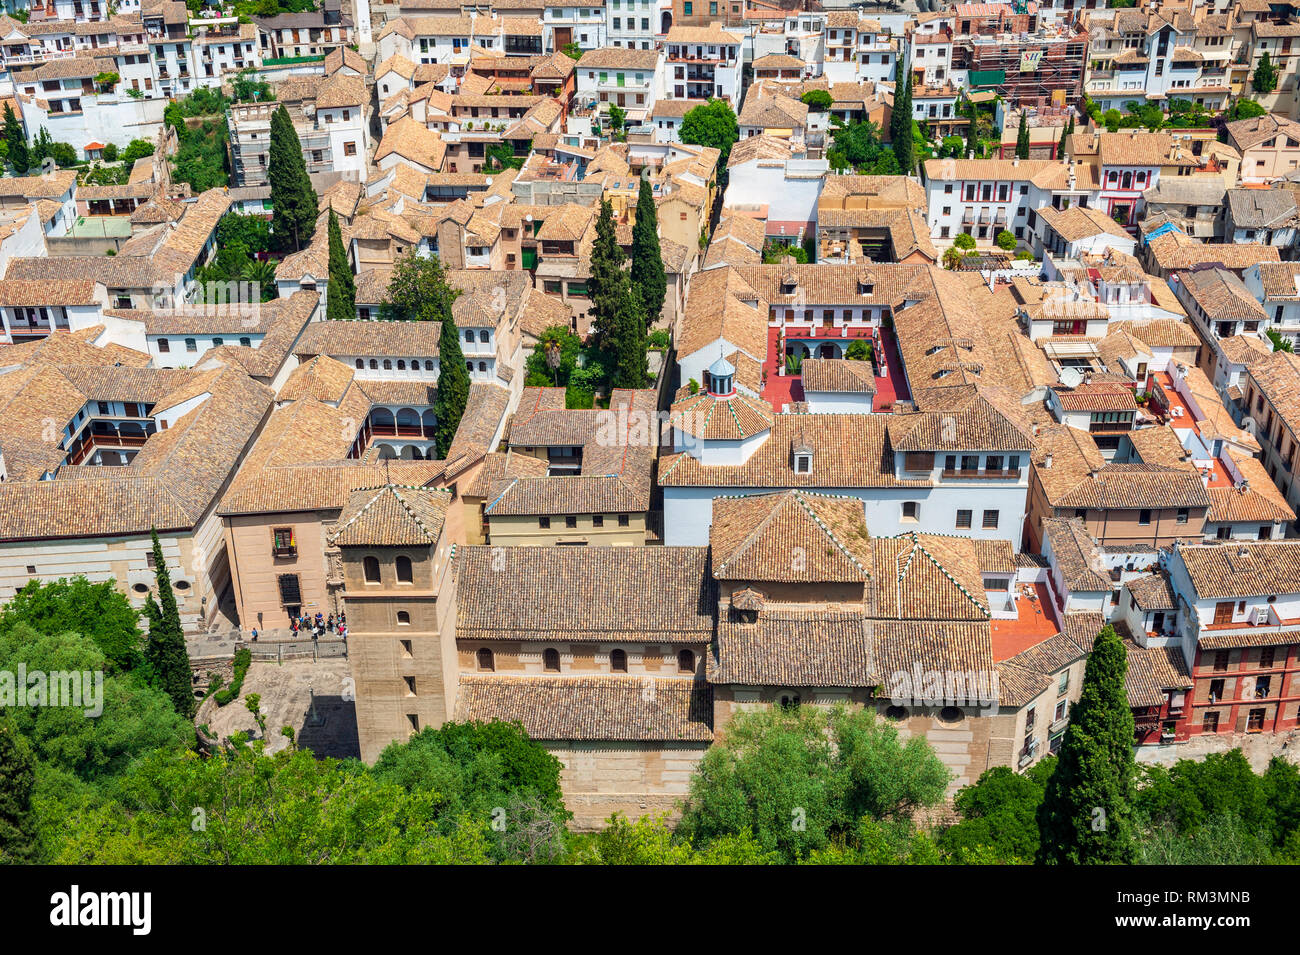 A view over the neighborhood of Albayzin from the Alhambra in Granada, Spain. The city is known for its medieval architecture dating back to the time  Stock Photo